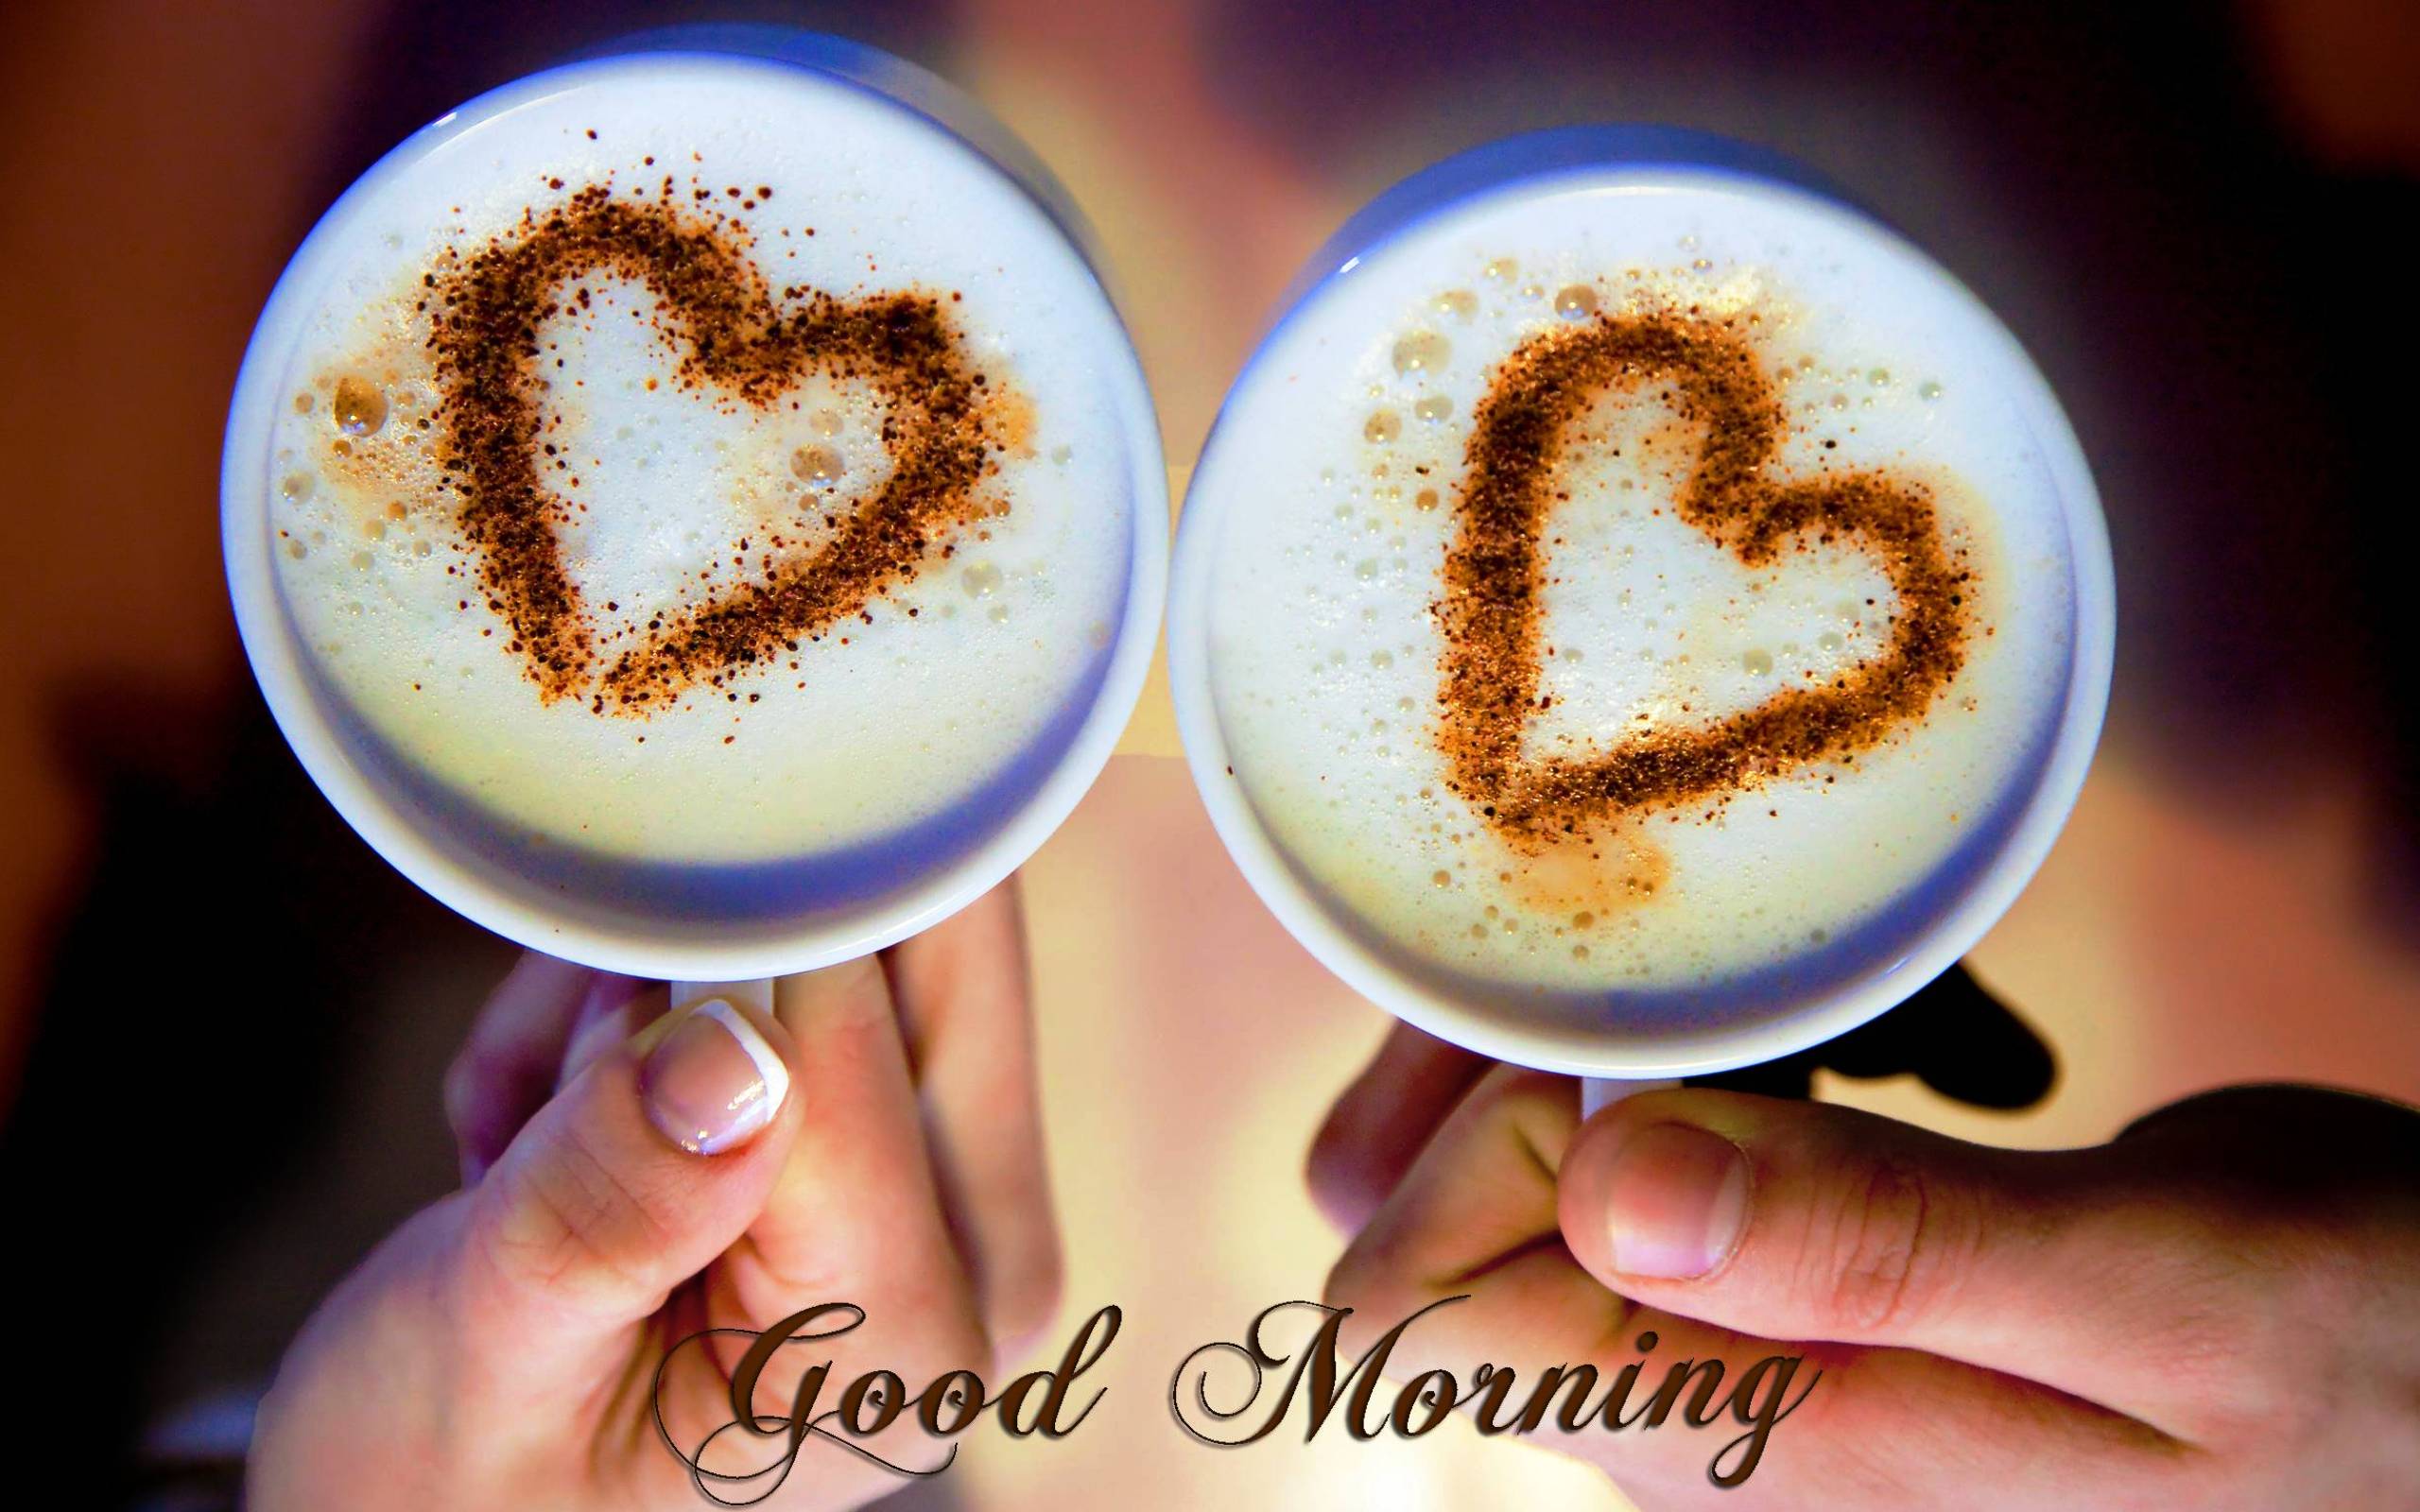 Good Morning – Coffee With Love - Good Morning Wishes & Images